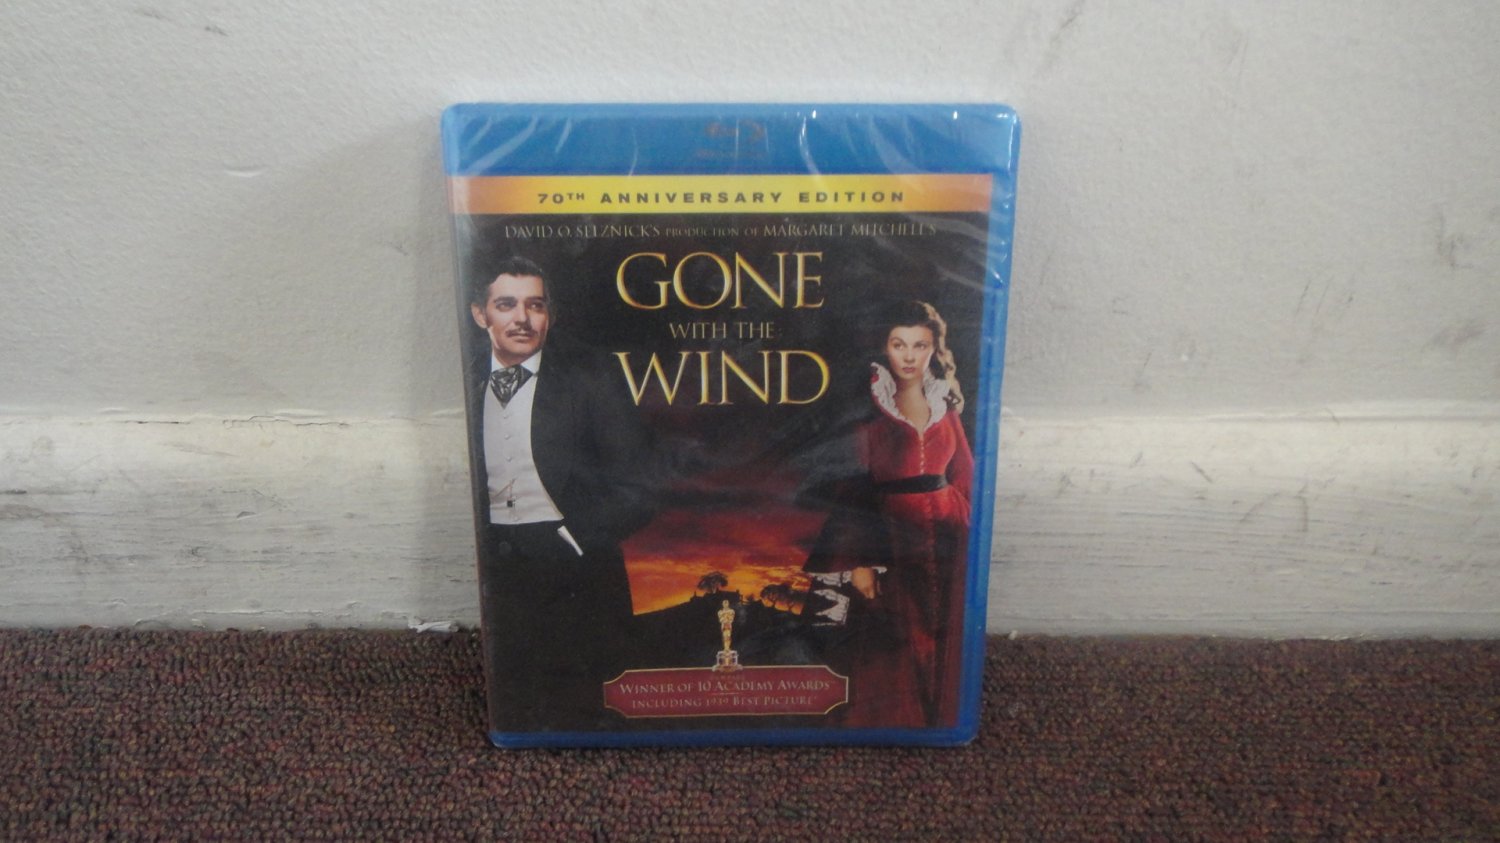 Gone With The Wind - Blu-Ray 70th Anniversary Edition!, NEW & Sealed...LooK!